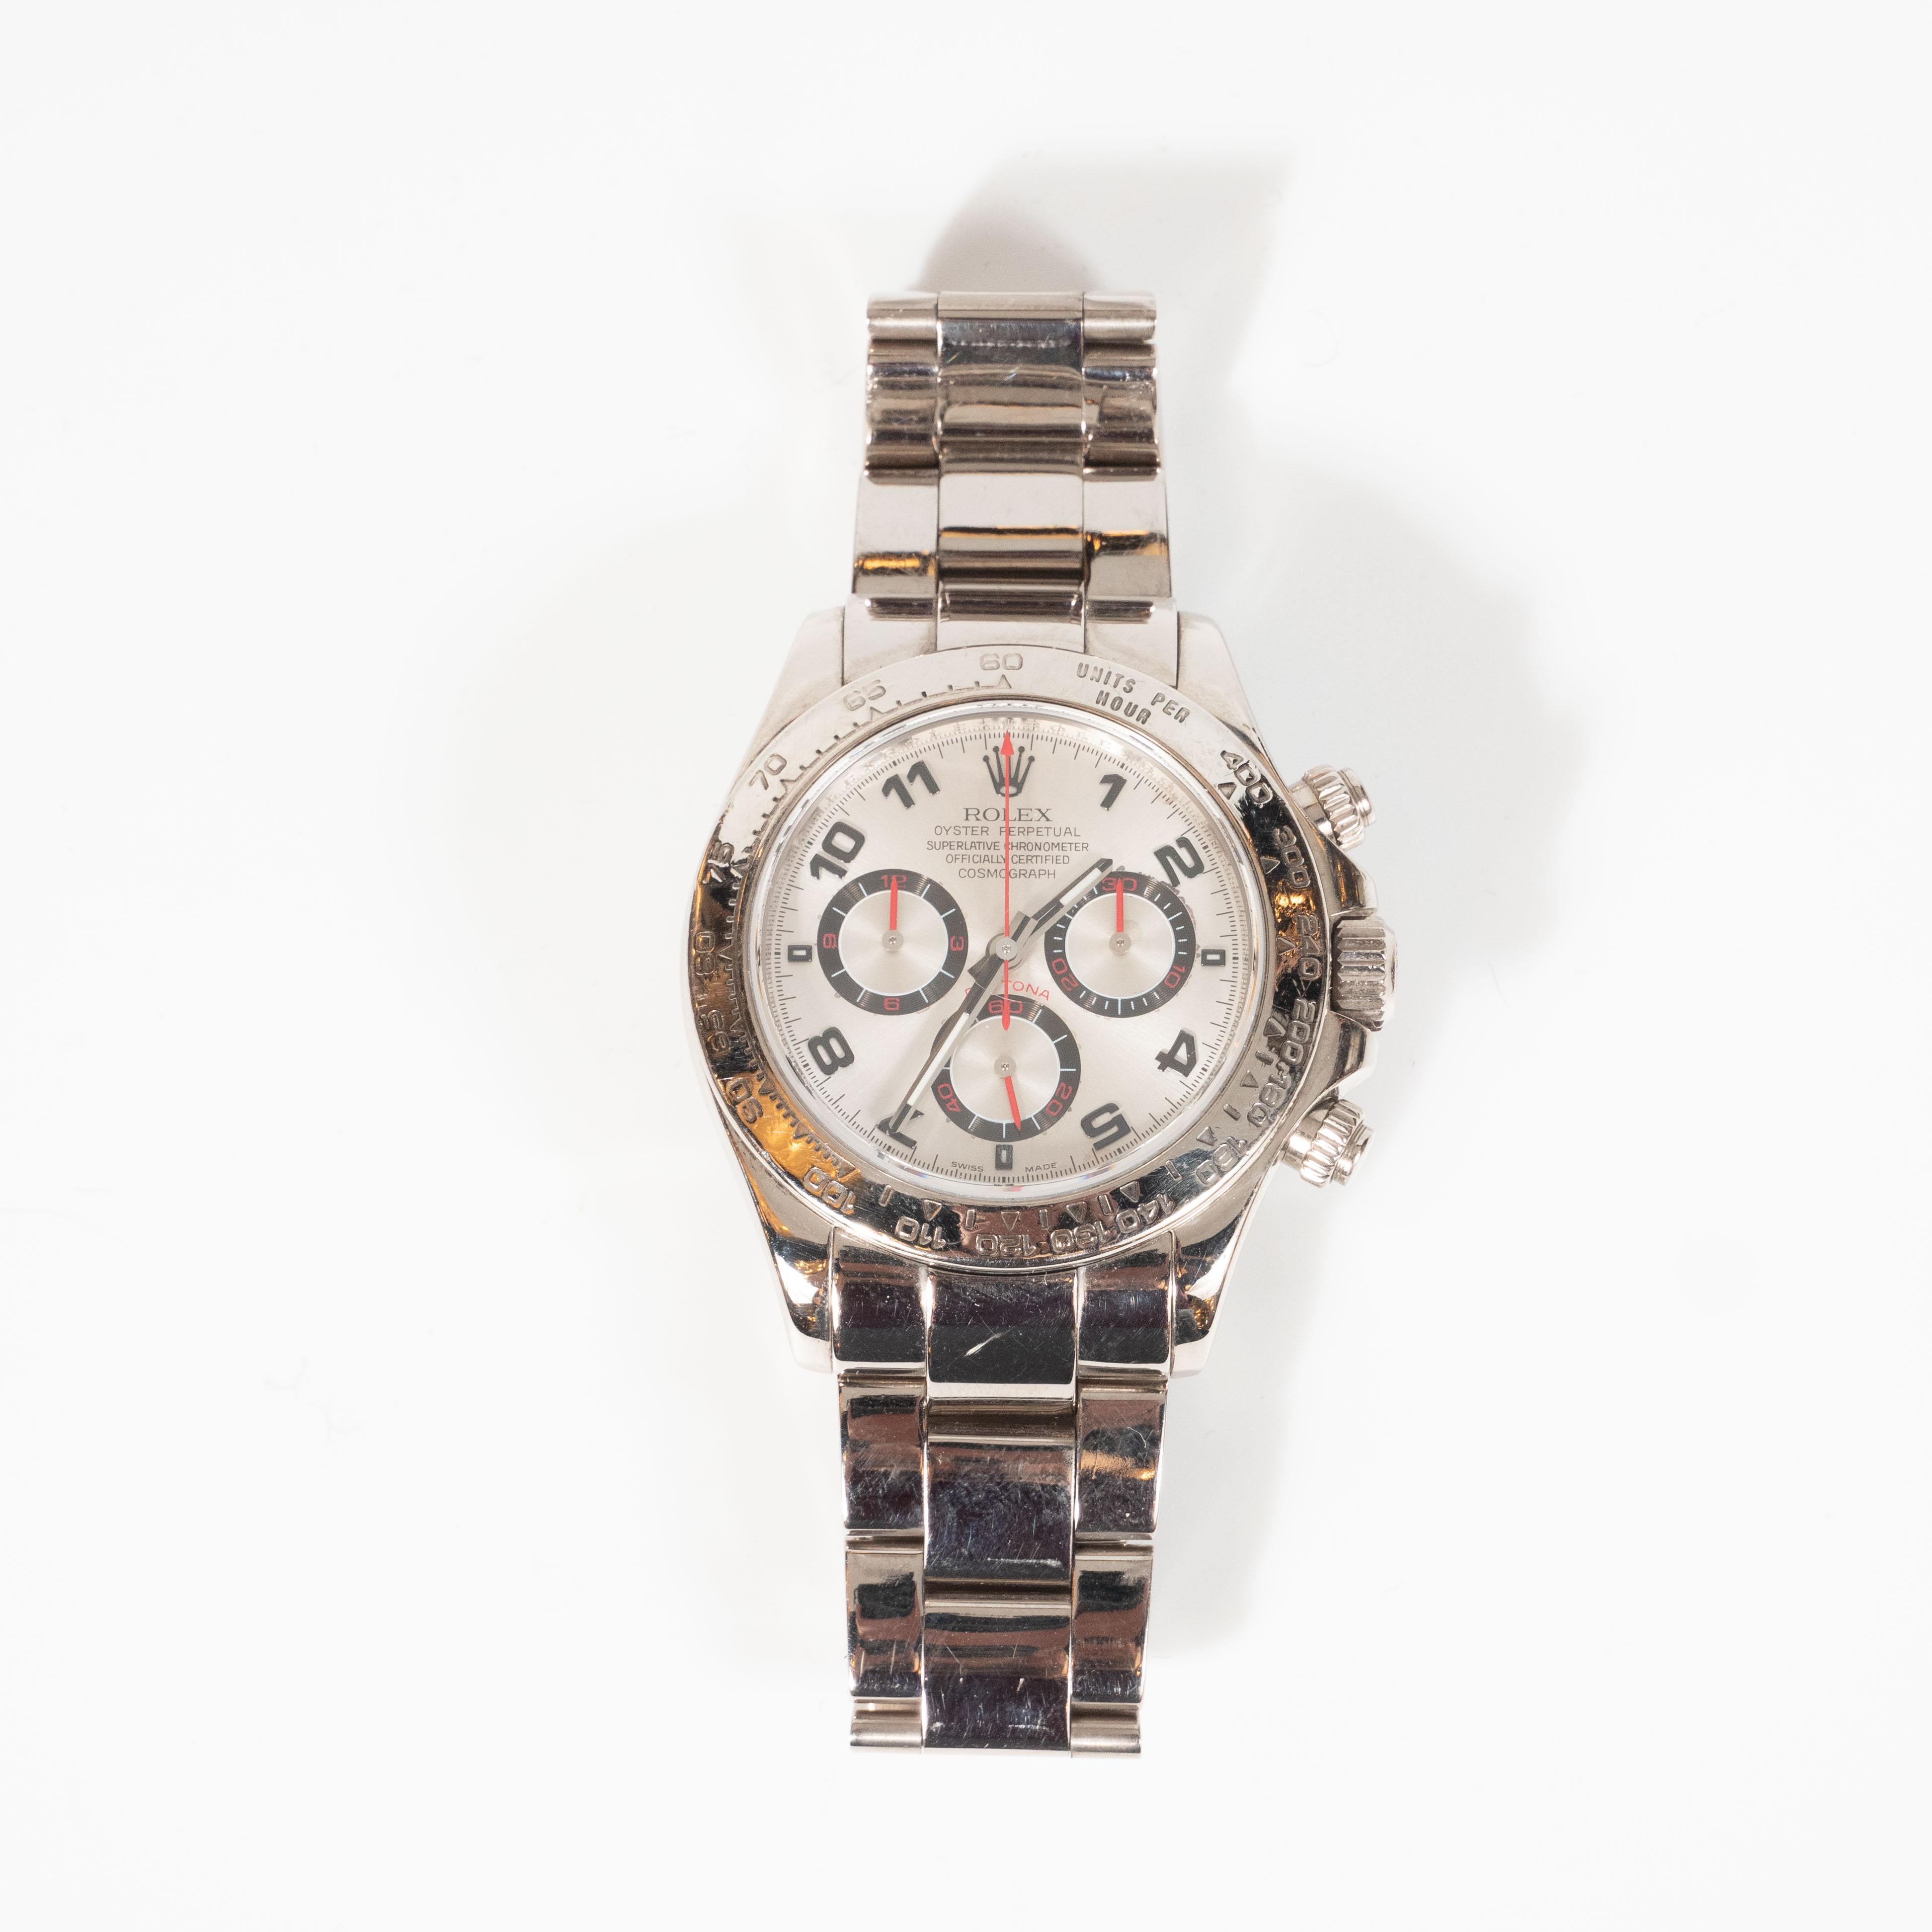 This handsome and iconic Rolex Cosmograph Daytona (Serial: Z506506) was hand-assembled in Geneva, Switzerland by Rolex- arguably the most recognized and illustrious names in the history of watchmaking- in 2007. Designed for those who appreciate the